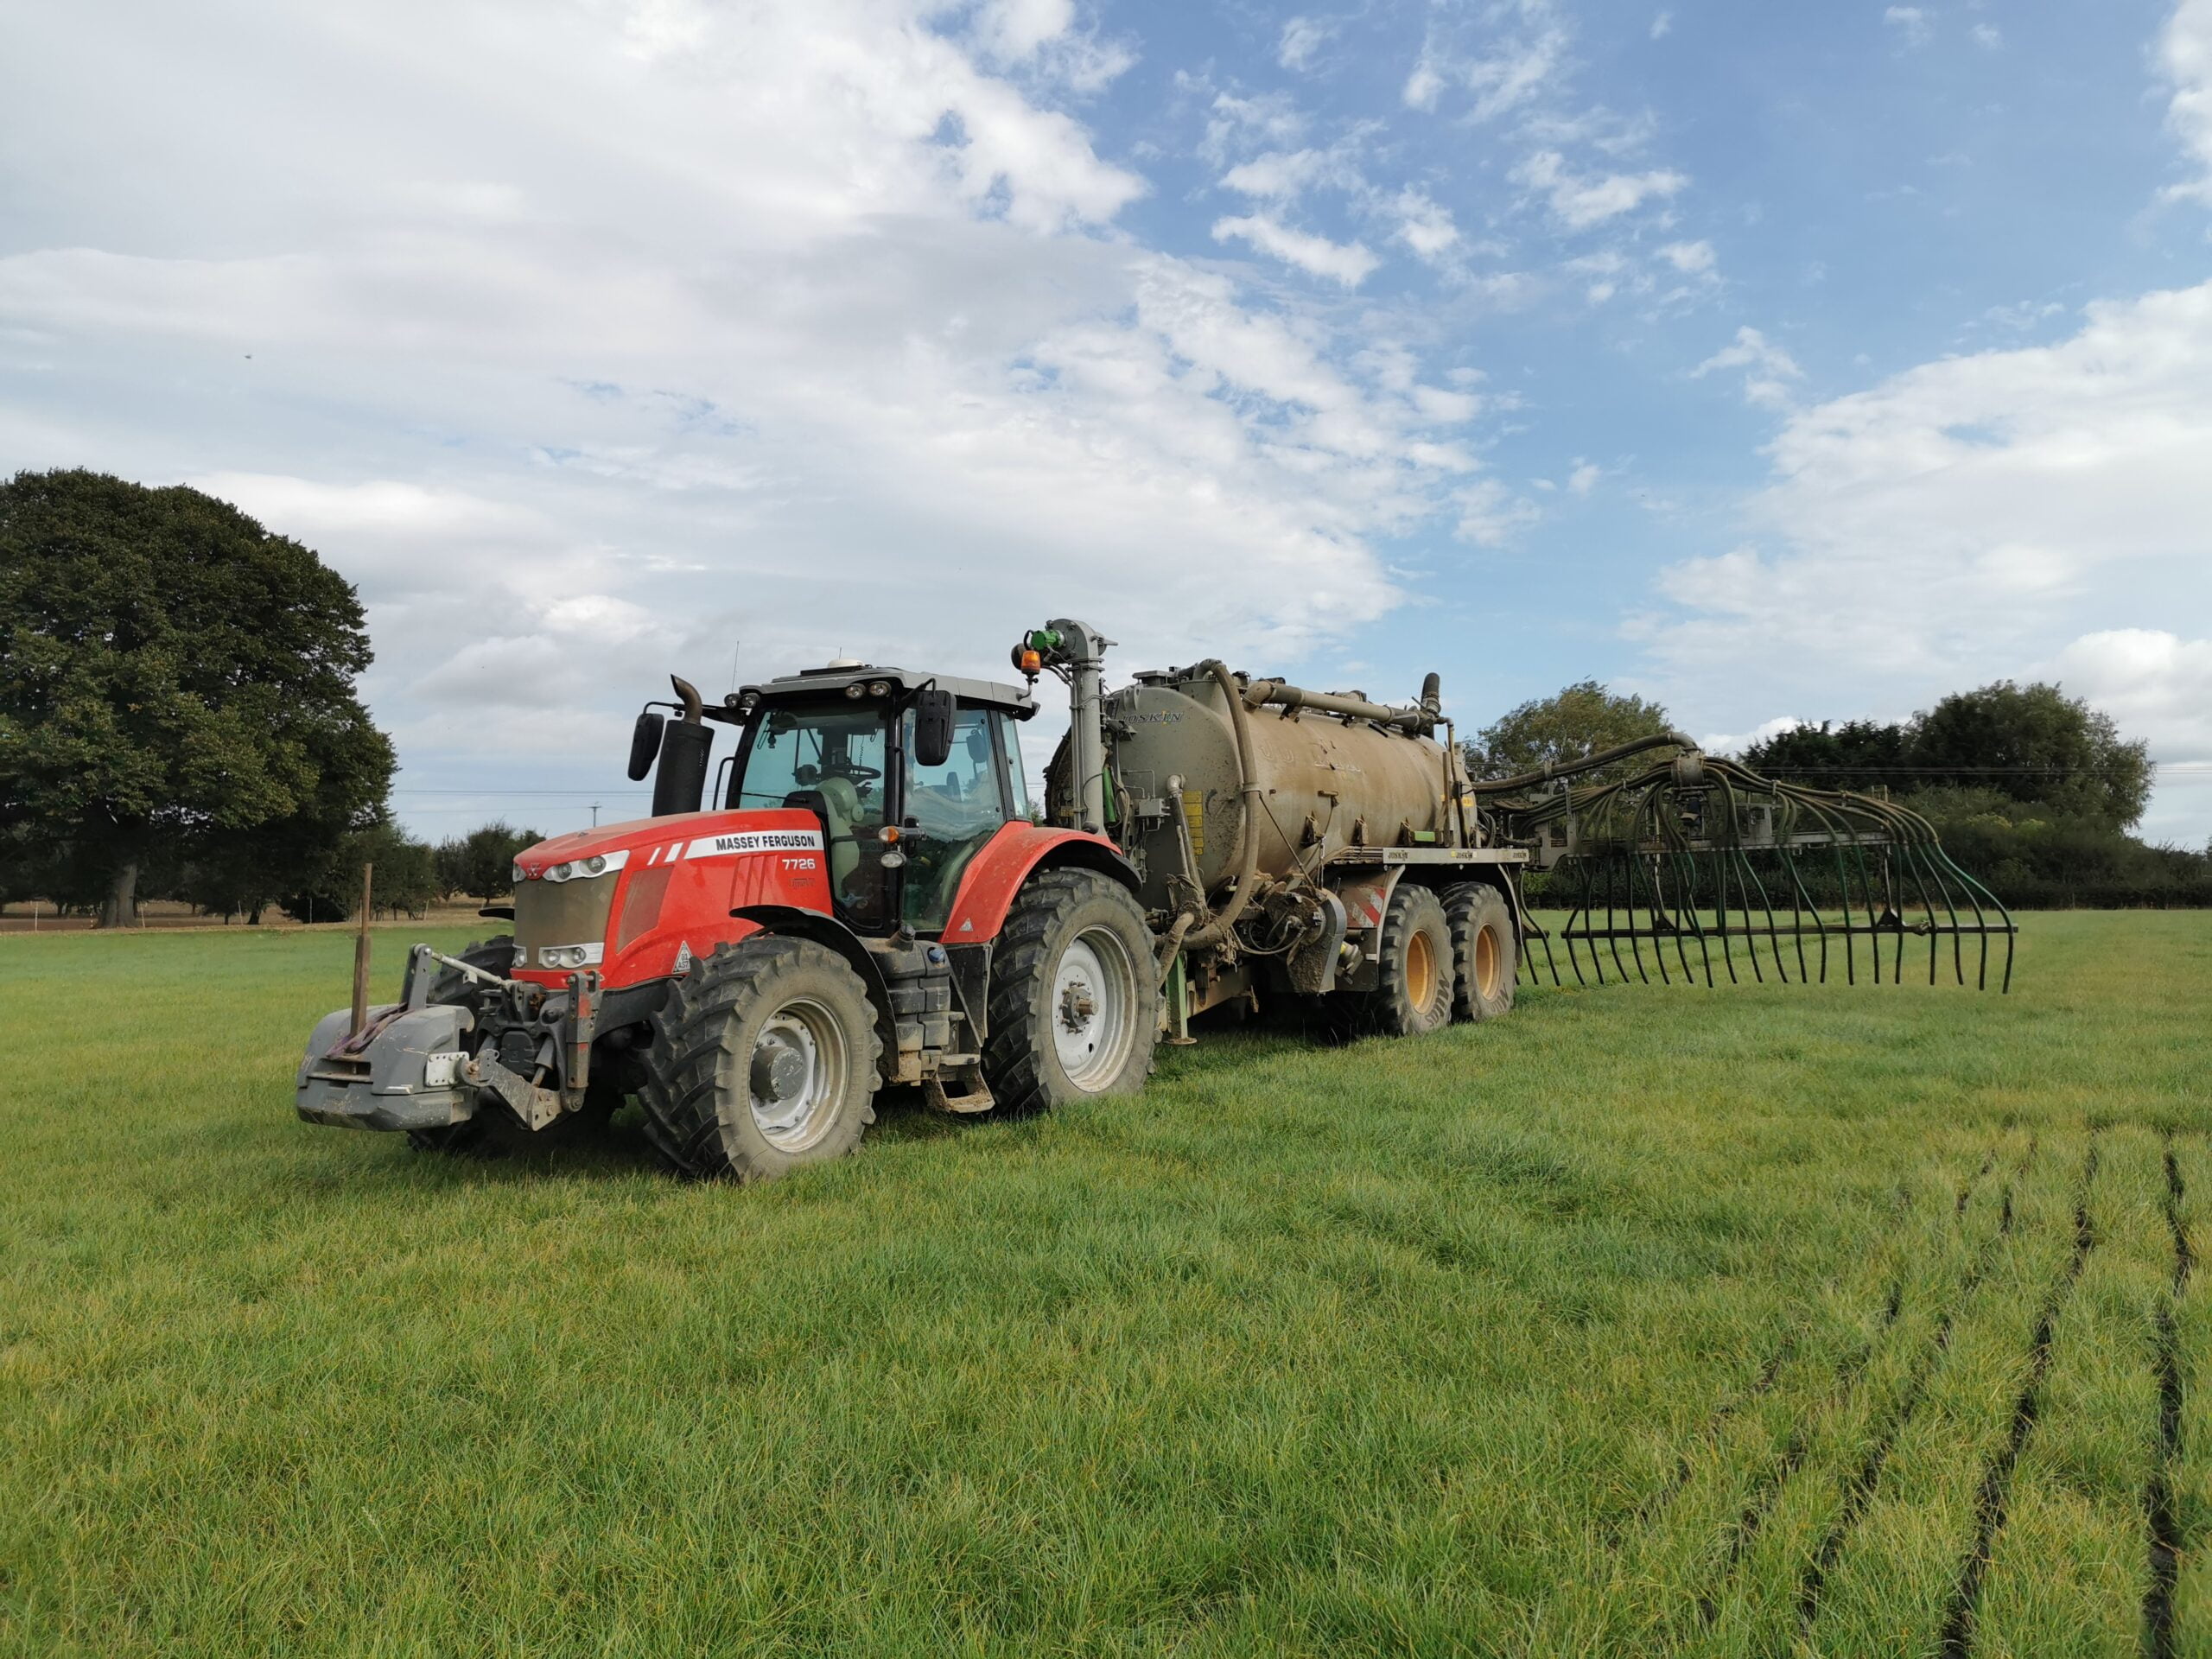 Slurry spreading with a farmer supported by Dairypower